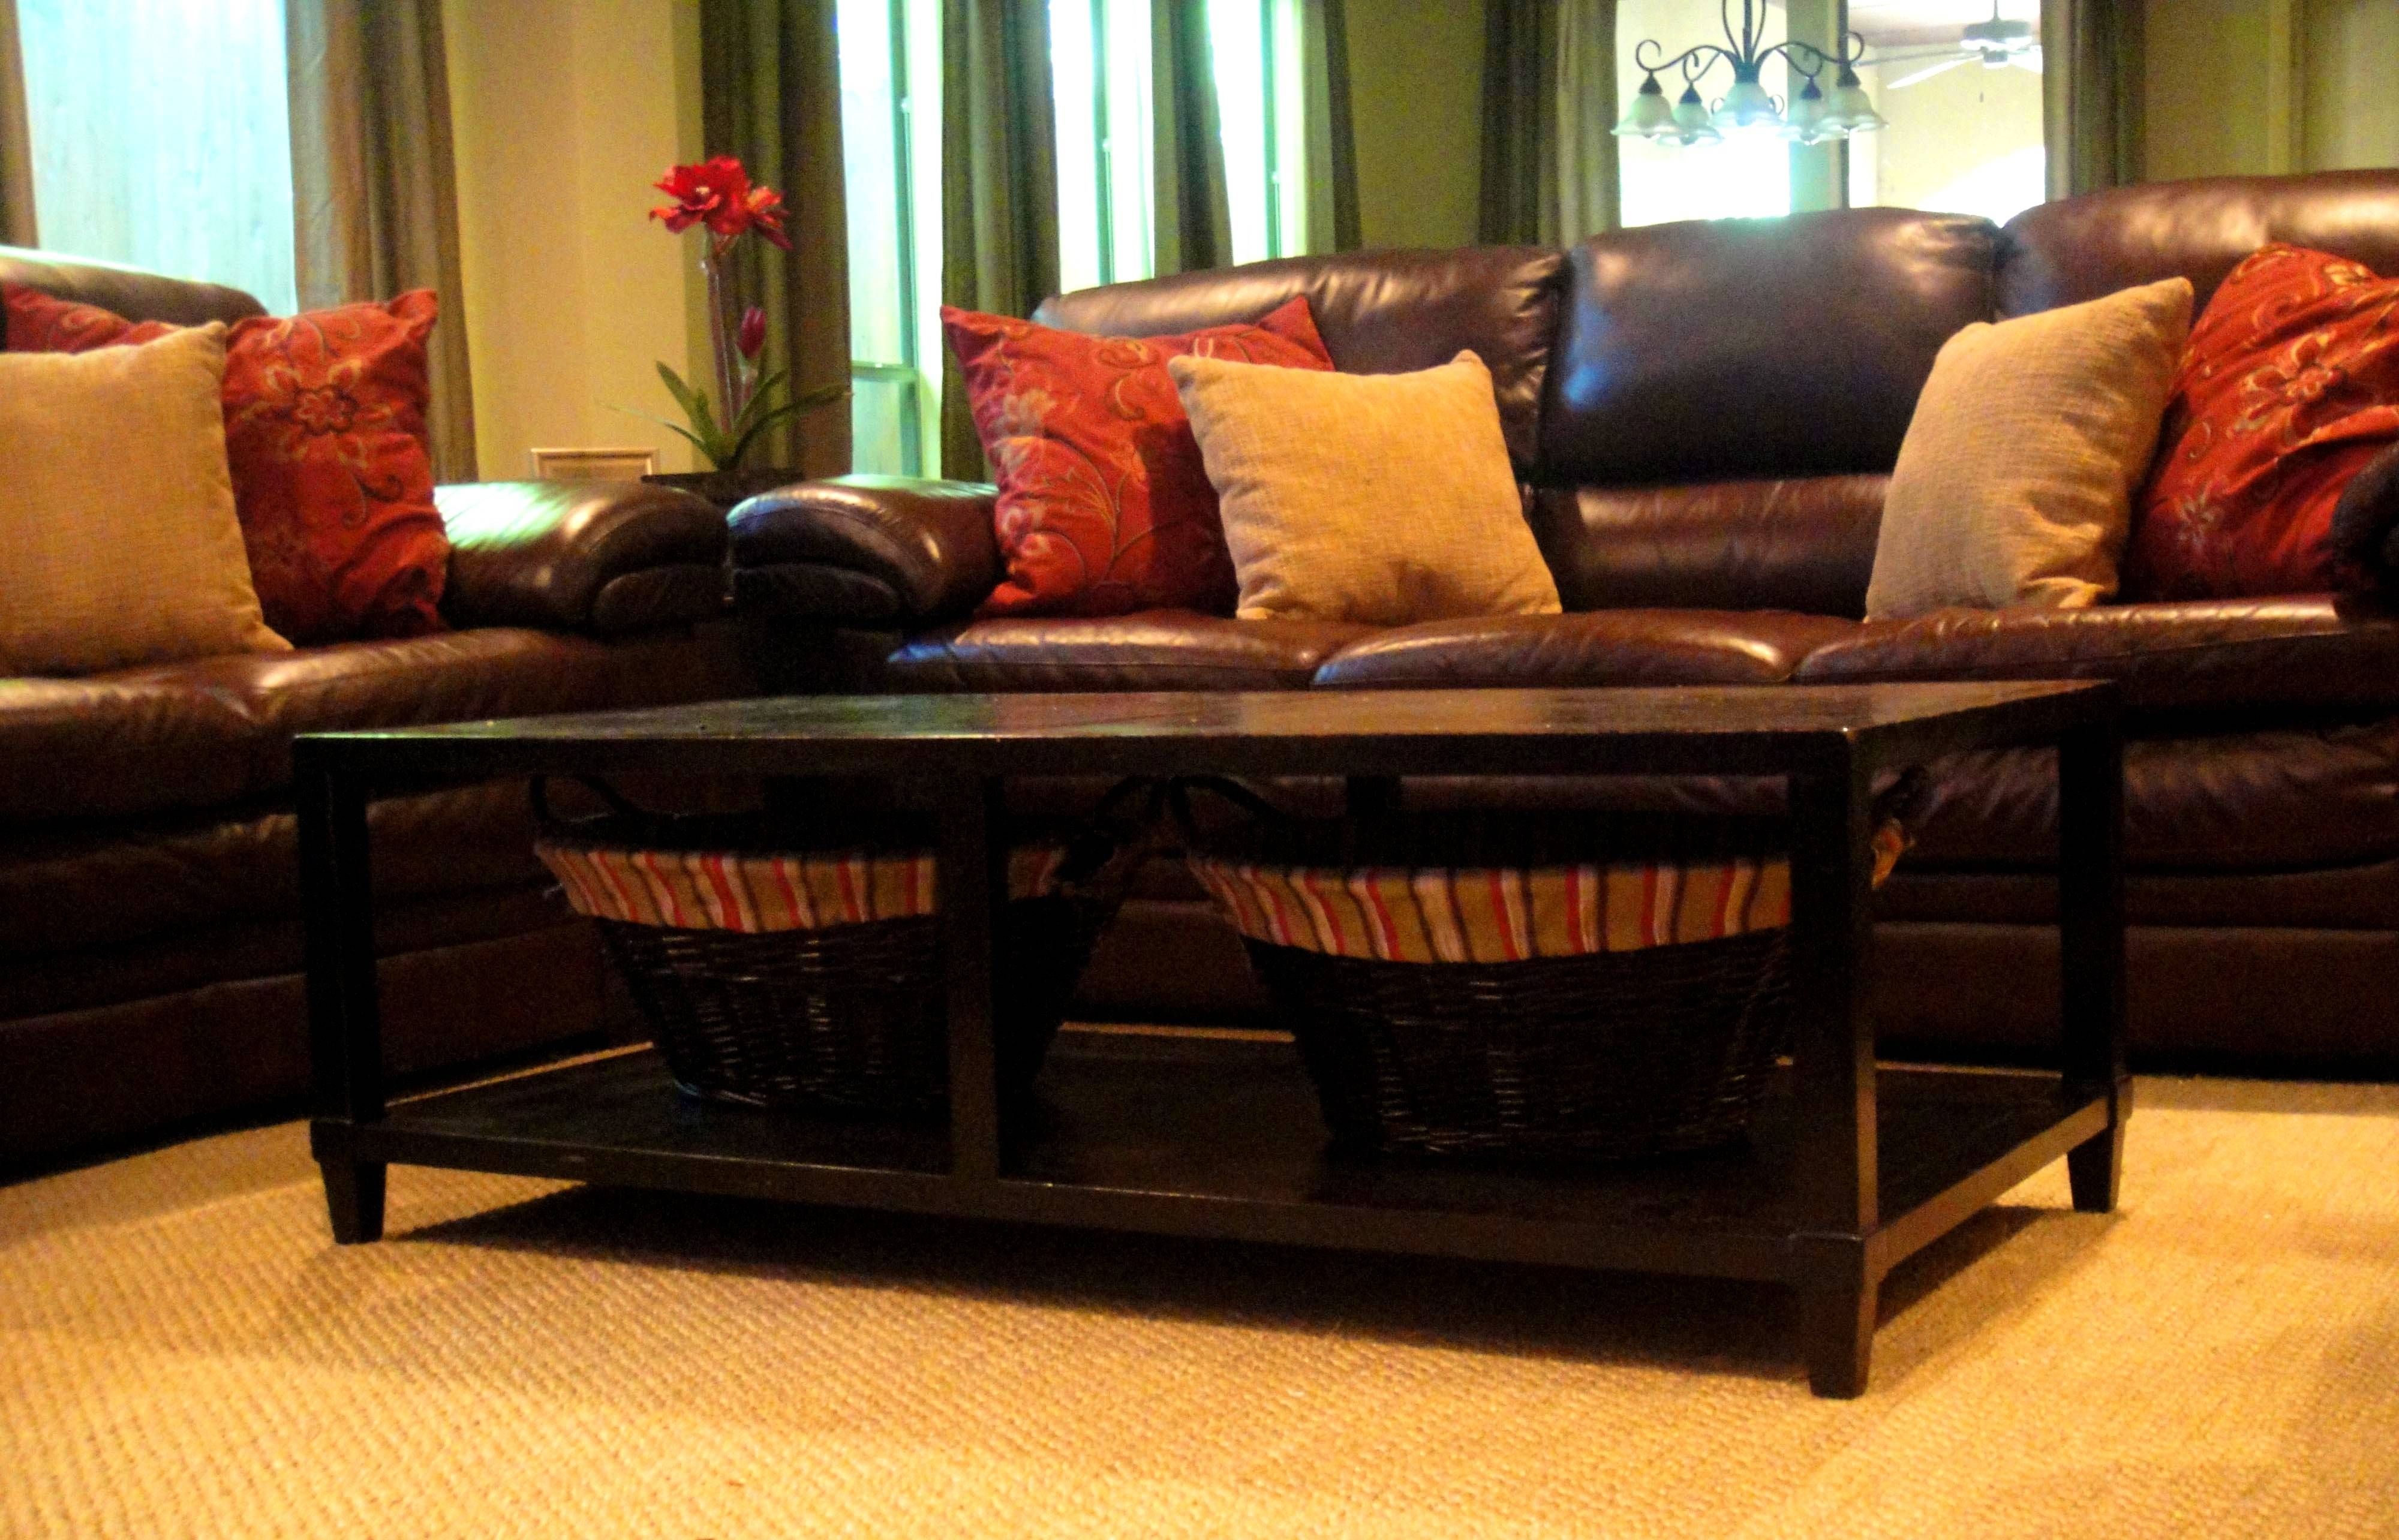 Coffee Table End Tables And Sets With Storage Square Basket Pertaining To Coffee Tables With Basket Storage Underneath (View 11 of 30)